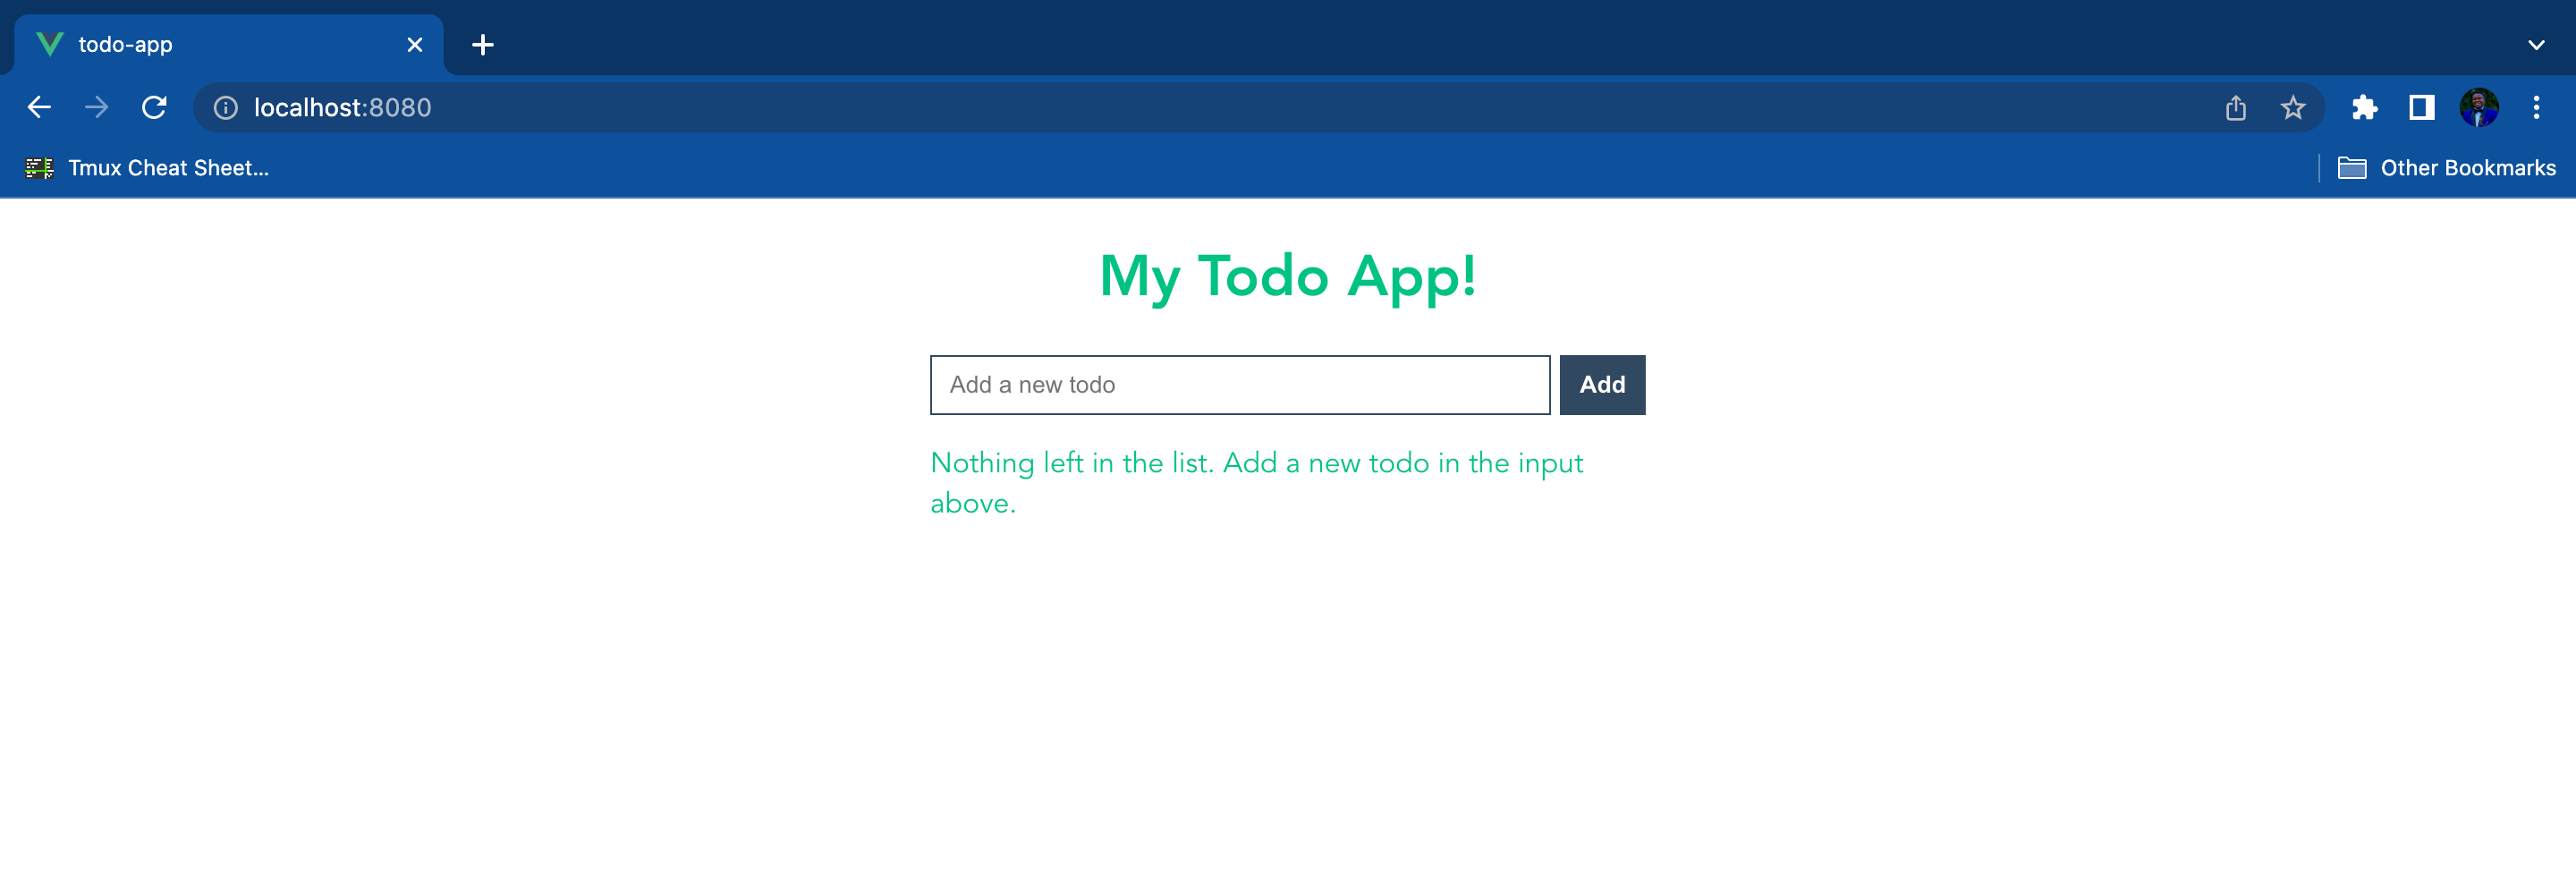 Screenshot of the Todo App opened in browser. The browser is viewing localhost:8080, and on the page, the header reads “My Todo App!” wth a box underneath labeled “Add a new todo”, along with an “Add” button to the right. Below is green text reading “Nothing left in the list. Add a new todo in the input above”.